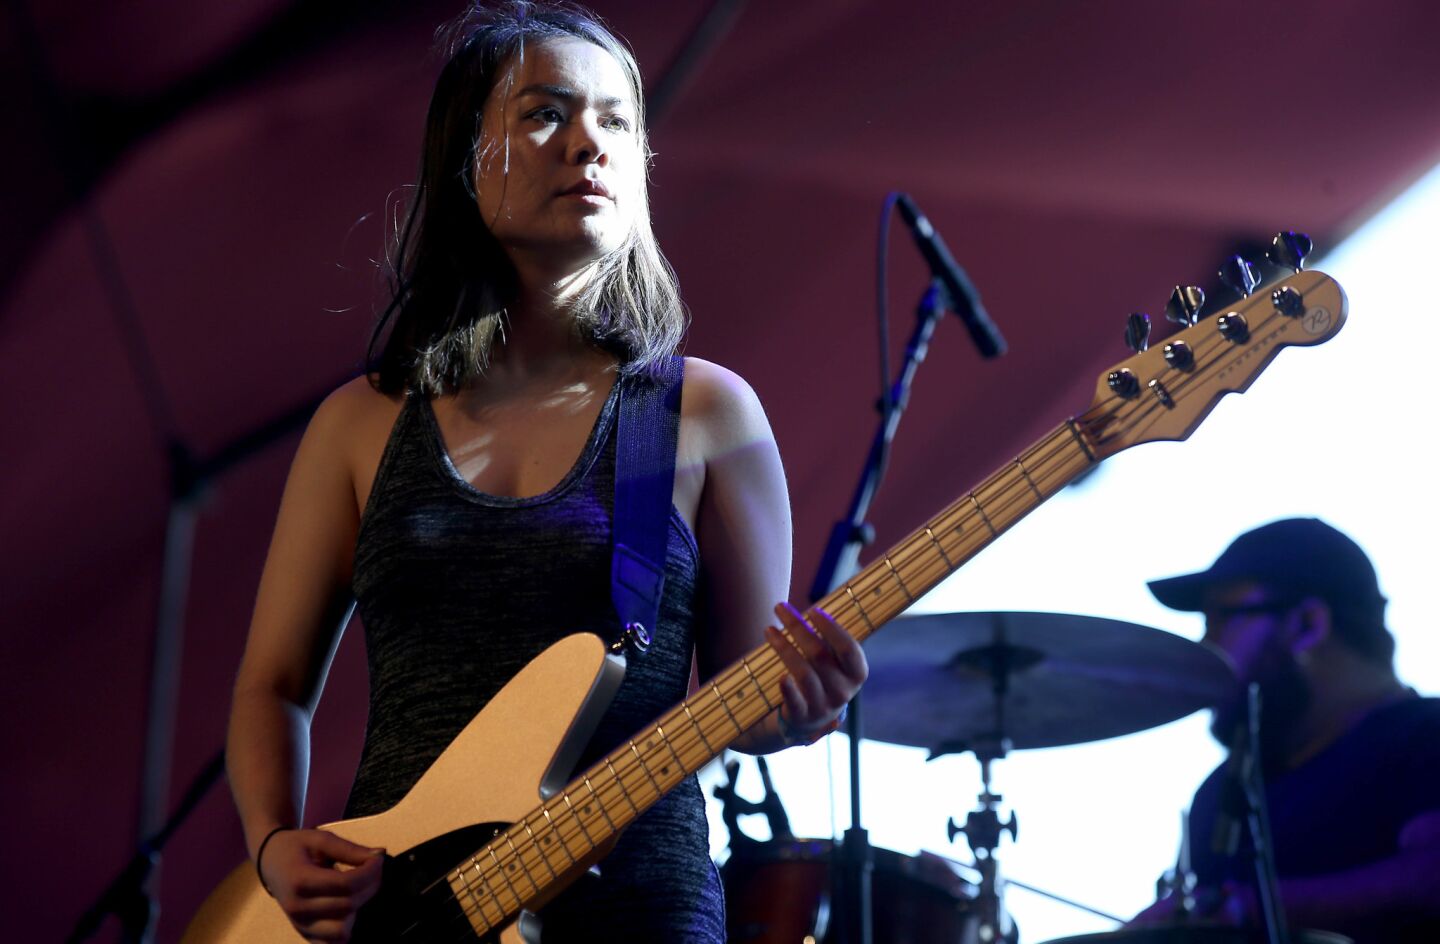 INDIO, CALIF. - APRIL 15, 2017. Mitski performs on the Gobi Stage on day two of the Coachella Music and Arts Festival in Indio on Saturday, April 15, 2017. (Luis Sinco/Los Angeles Times)